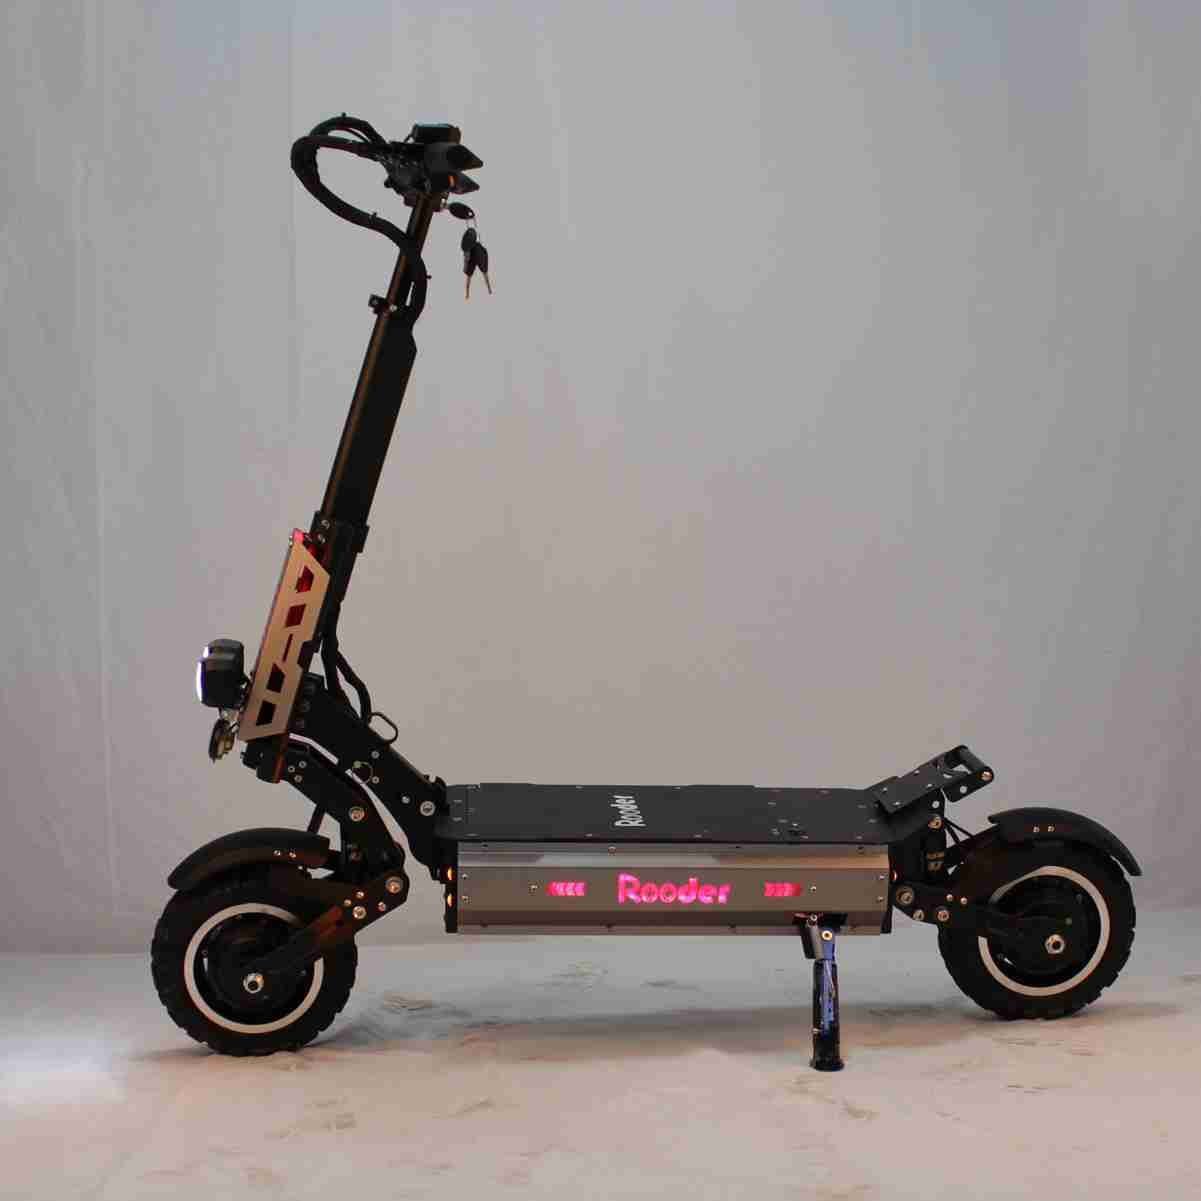 Three Wheel Electric Scooter With Seat